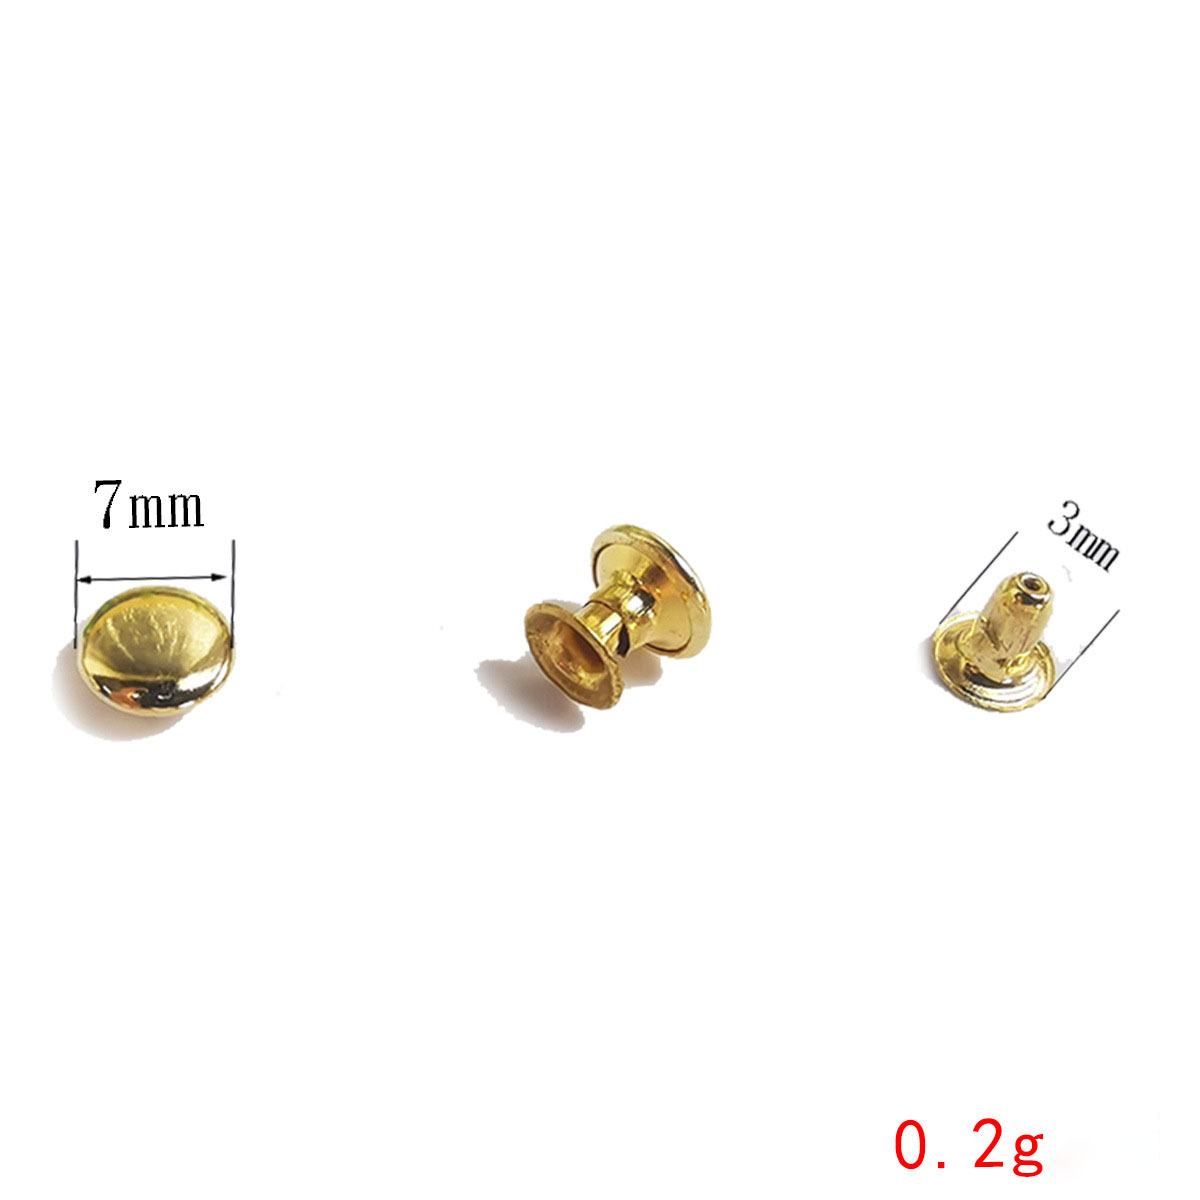 19:7mm gold